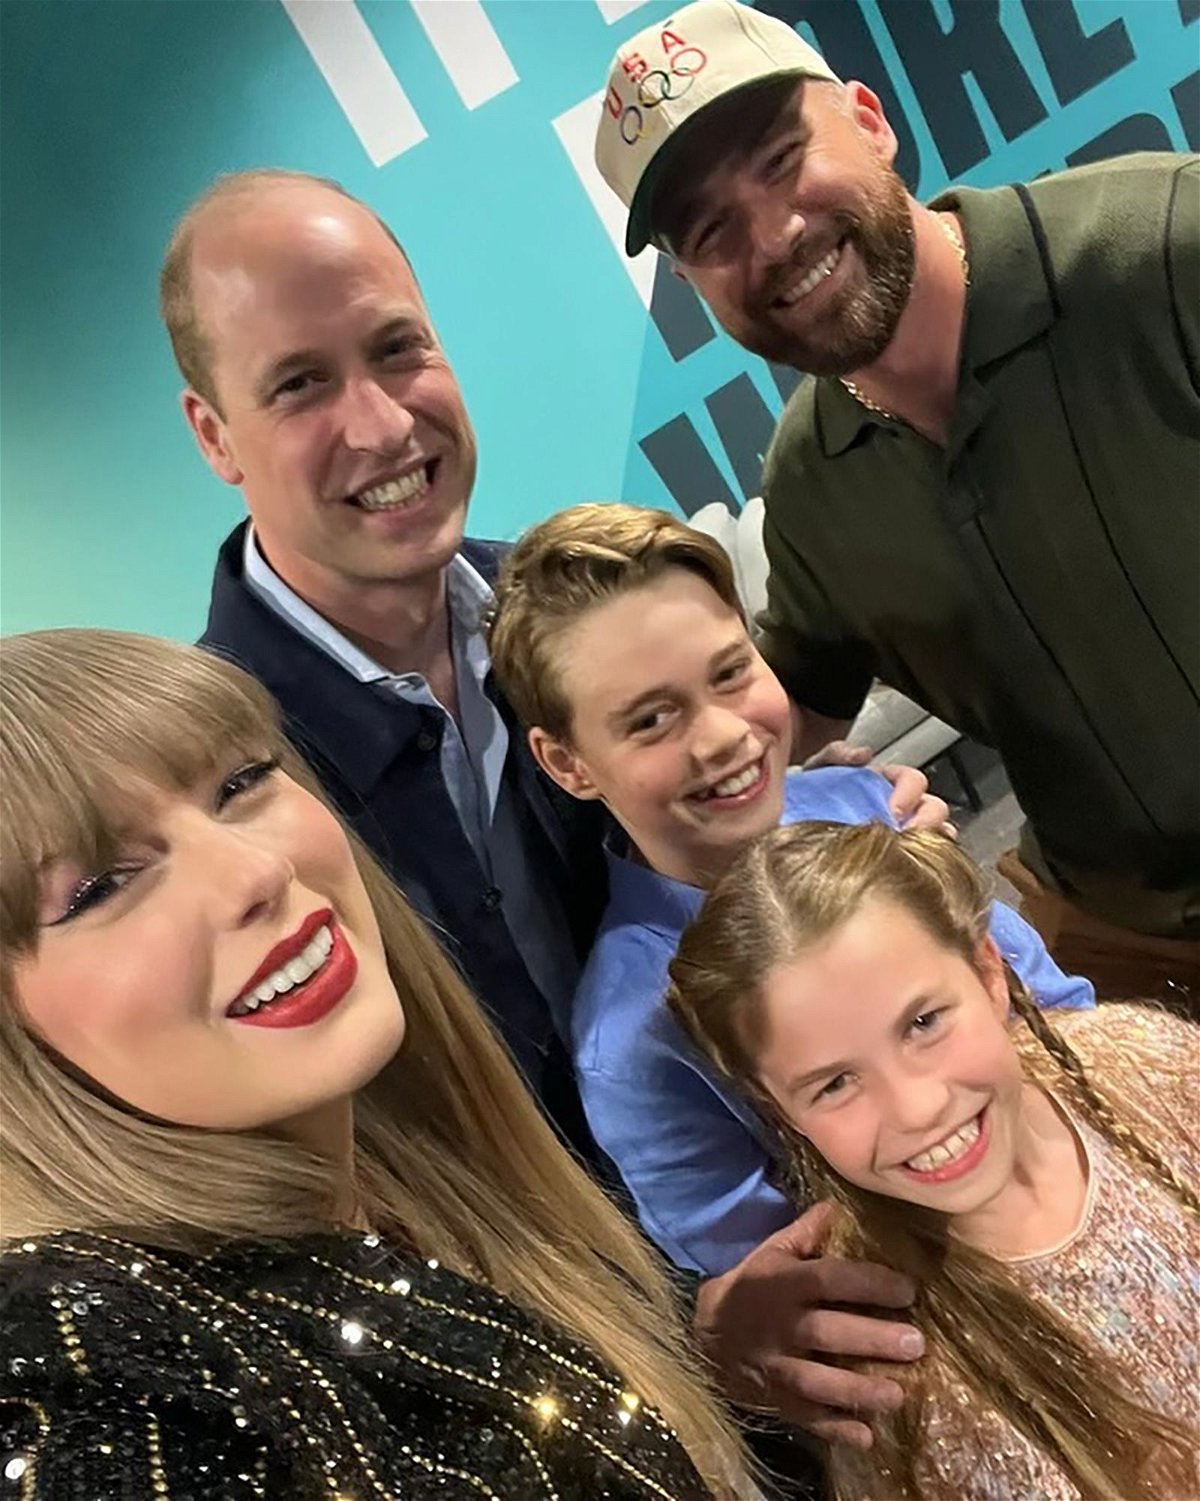 <i>From Taylor Swift/Instagram via CNN Newsource</i><br/>Taylor Swift shared a photo with Prince William